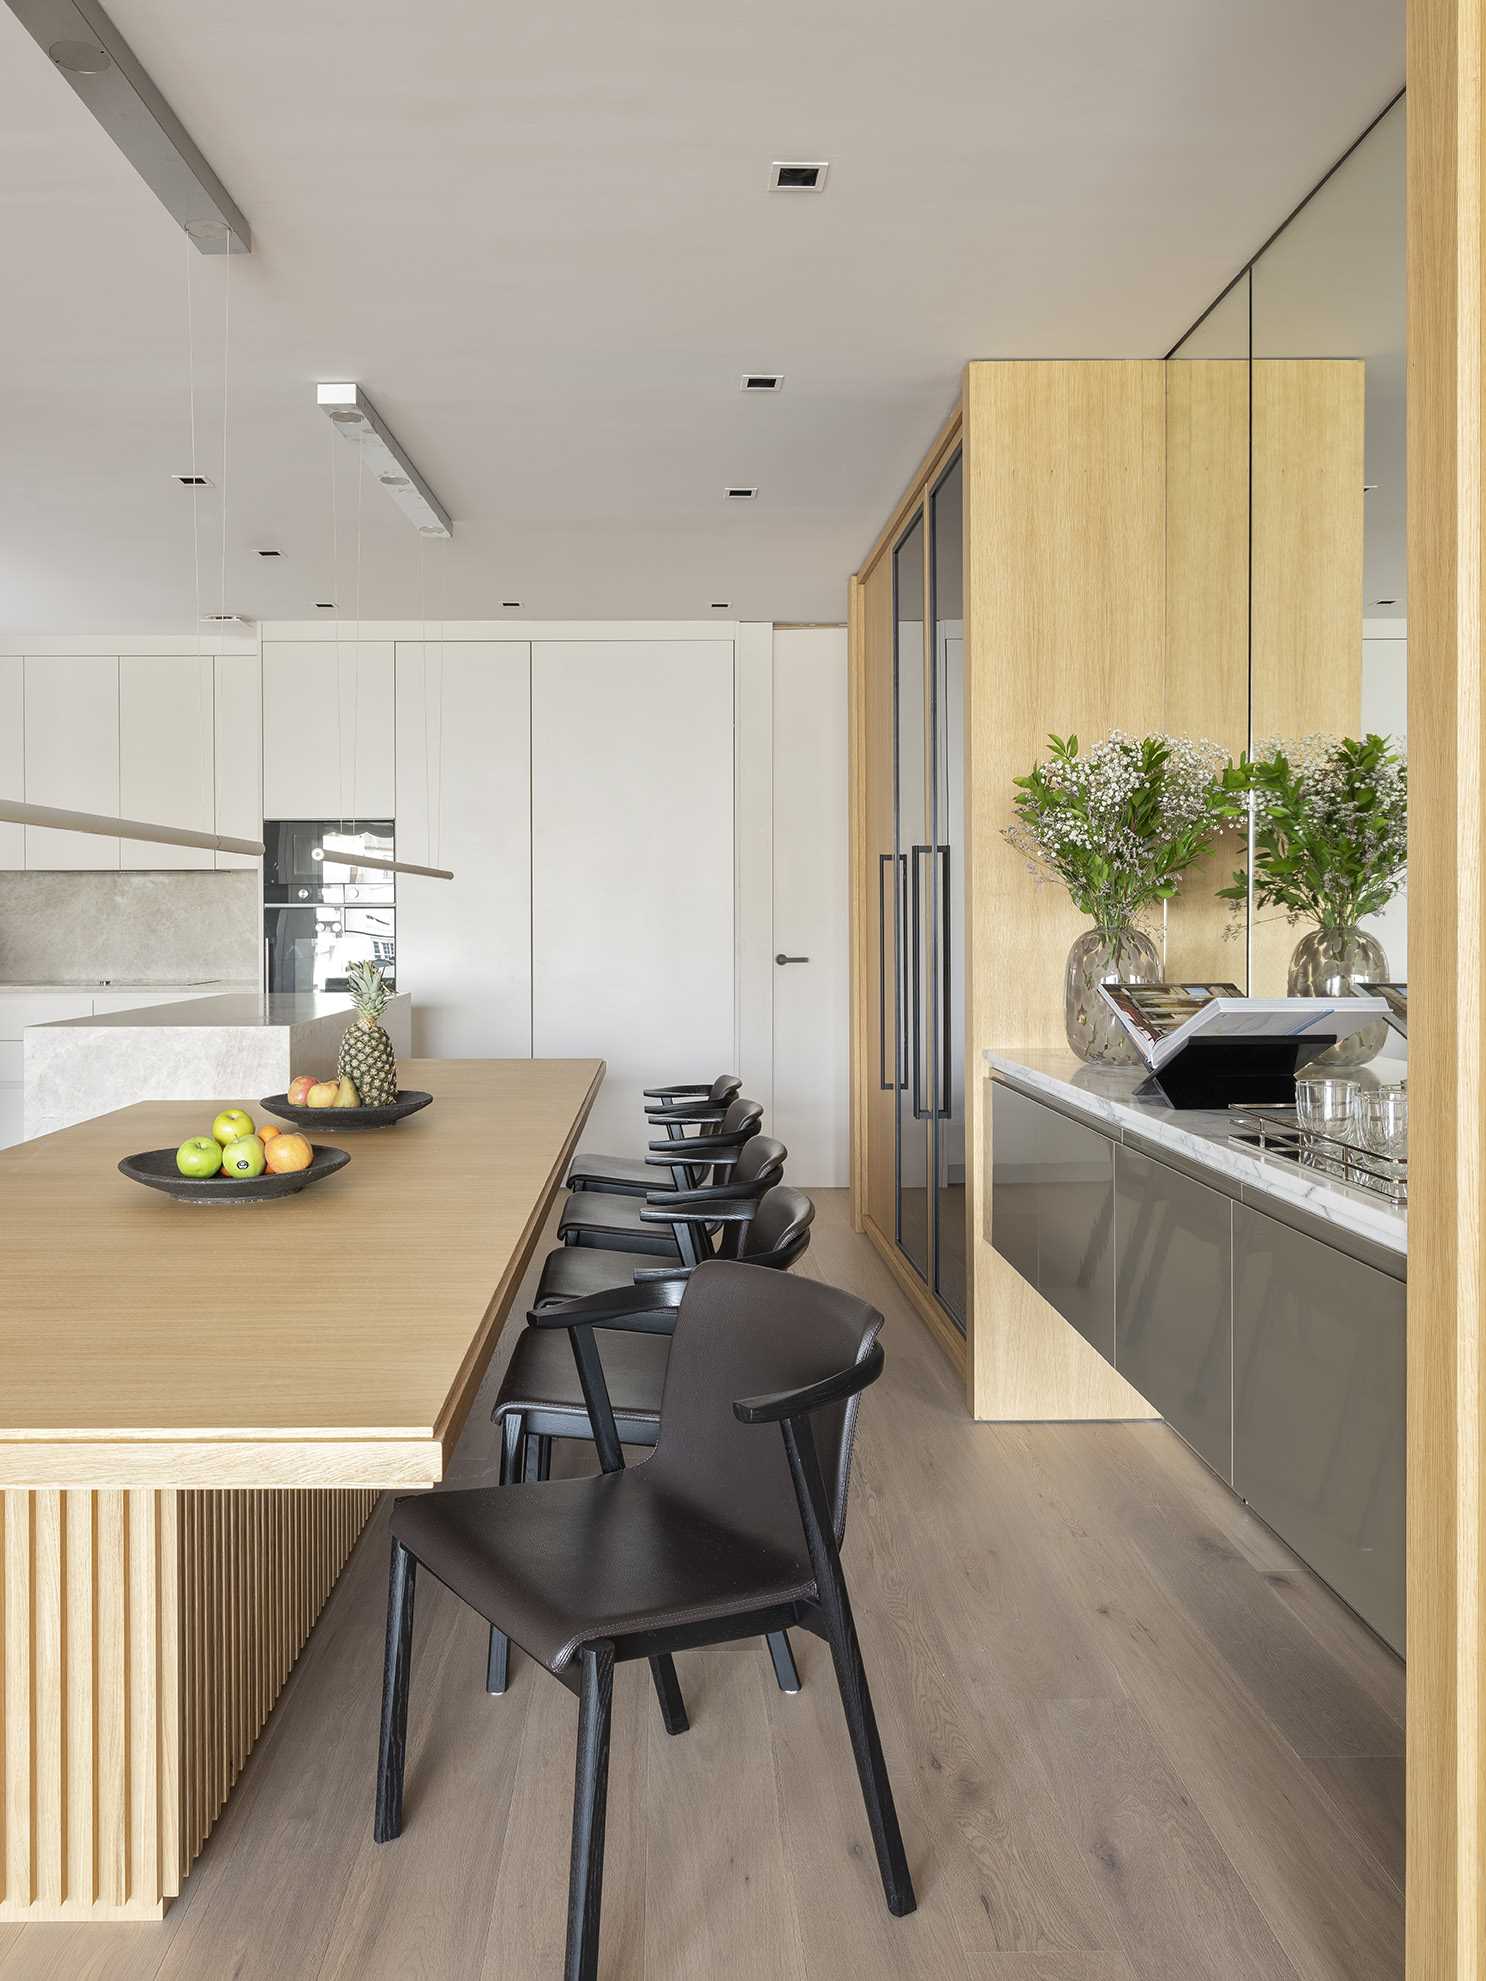 An open and ،ious kitchen layout has been designed to invite engagement, where a marble bar and a long wooden dining table play ،st. A mirrored wall has also been included in this ،e.